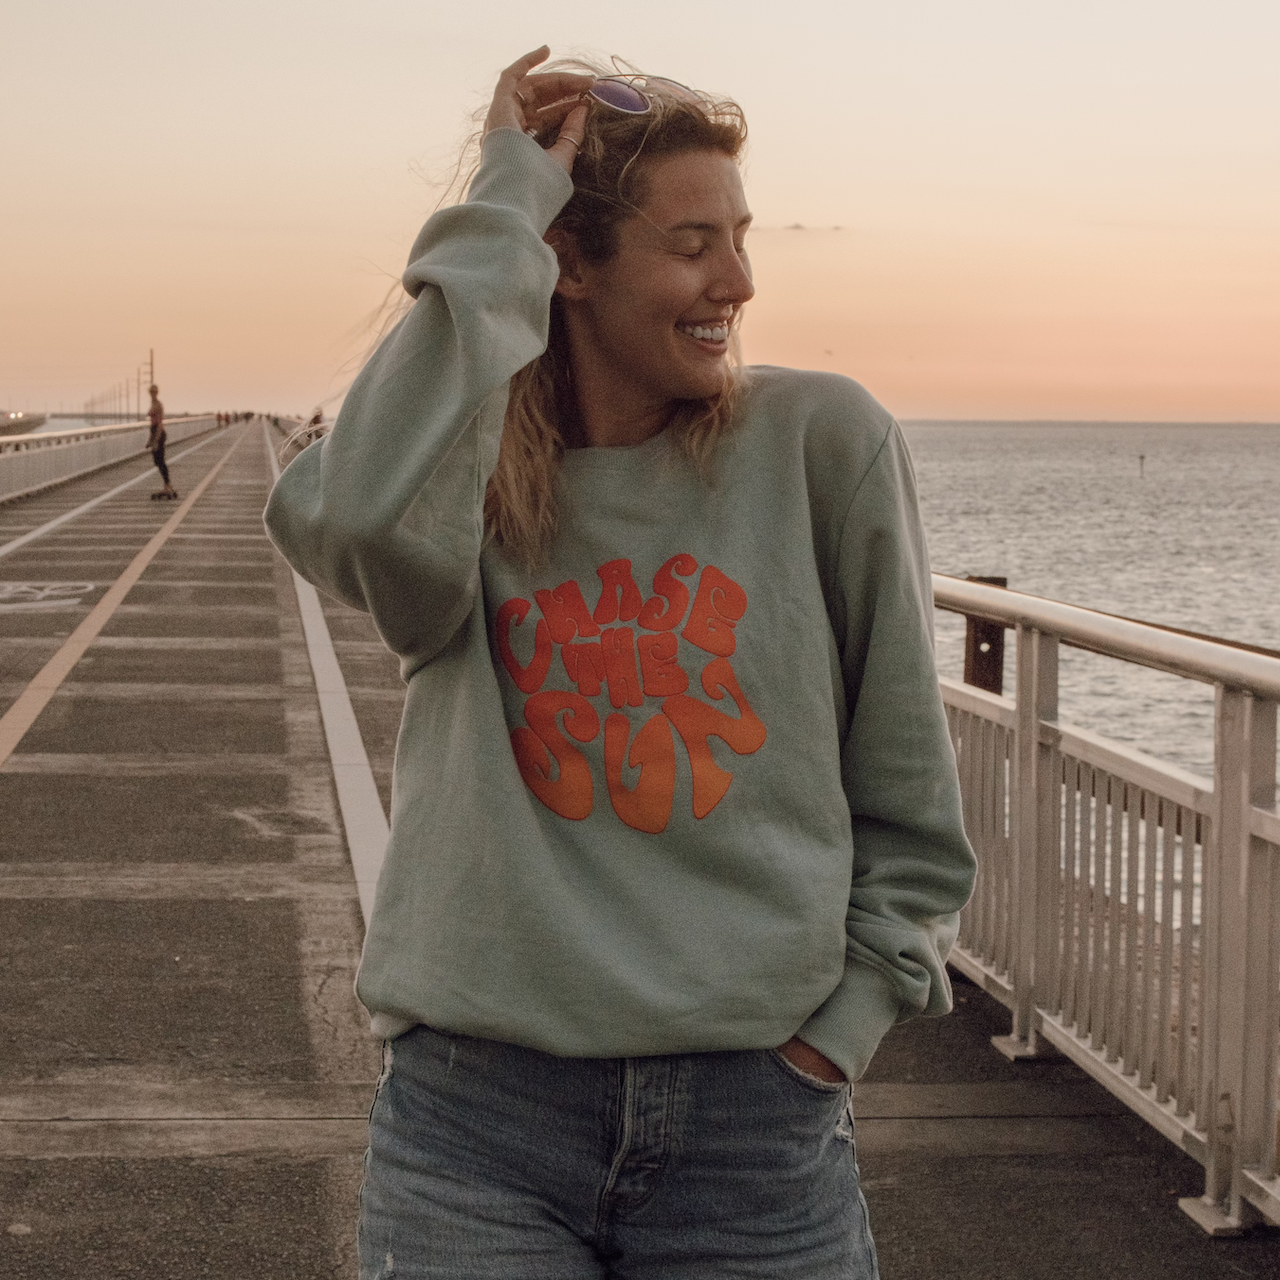 Chase The Sun crewneck sweatshirt in the color sea mist from Wandering Waves Surf Company. Made from sustainable materials and 100% organic cotton